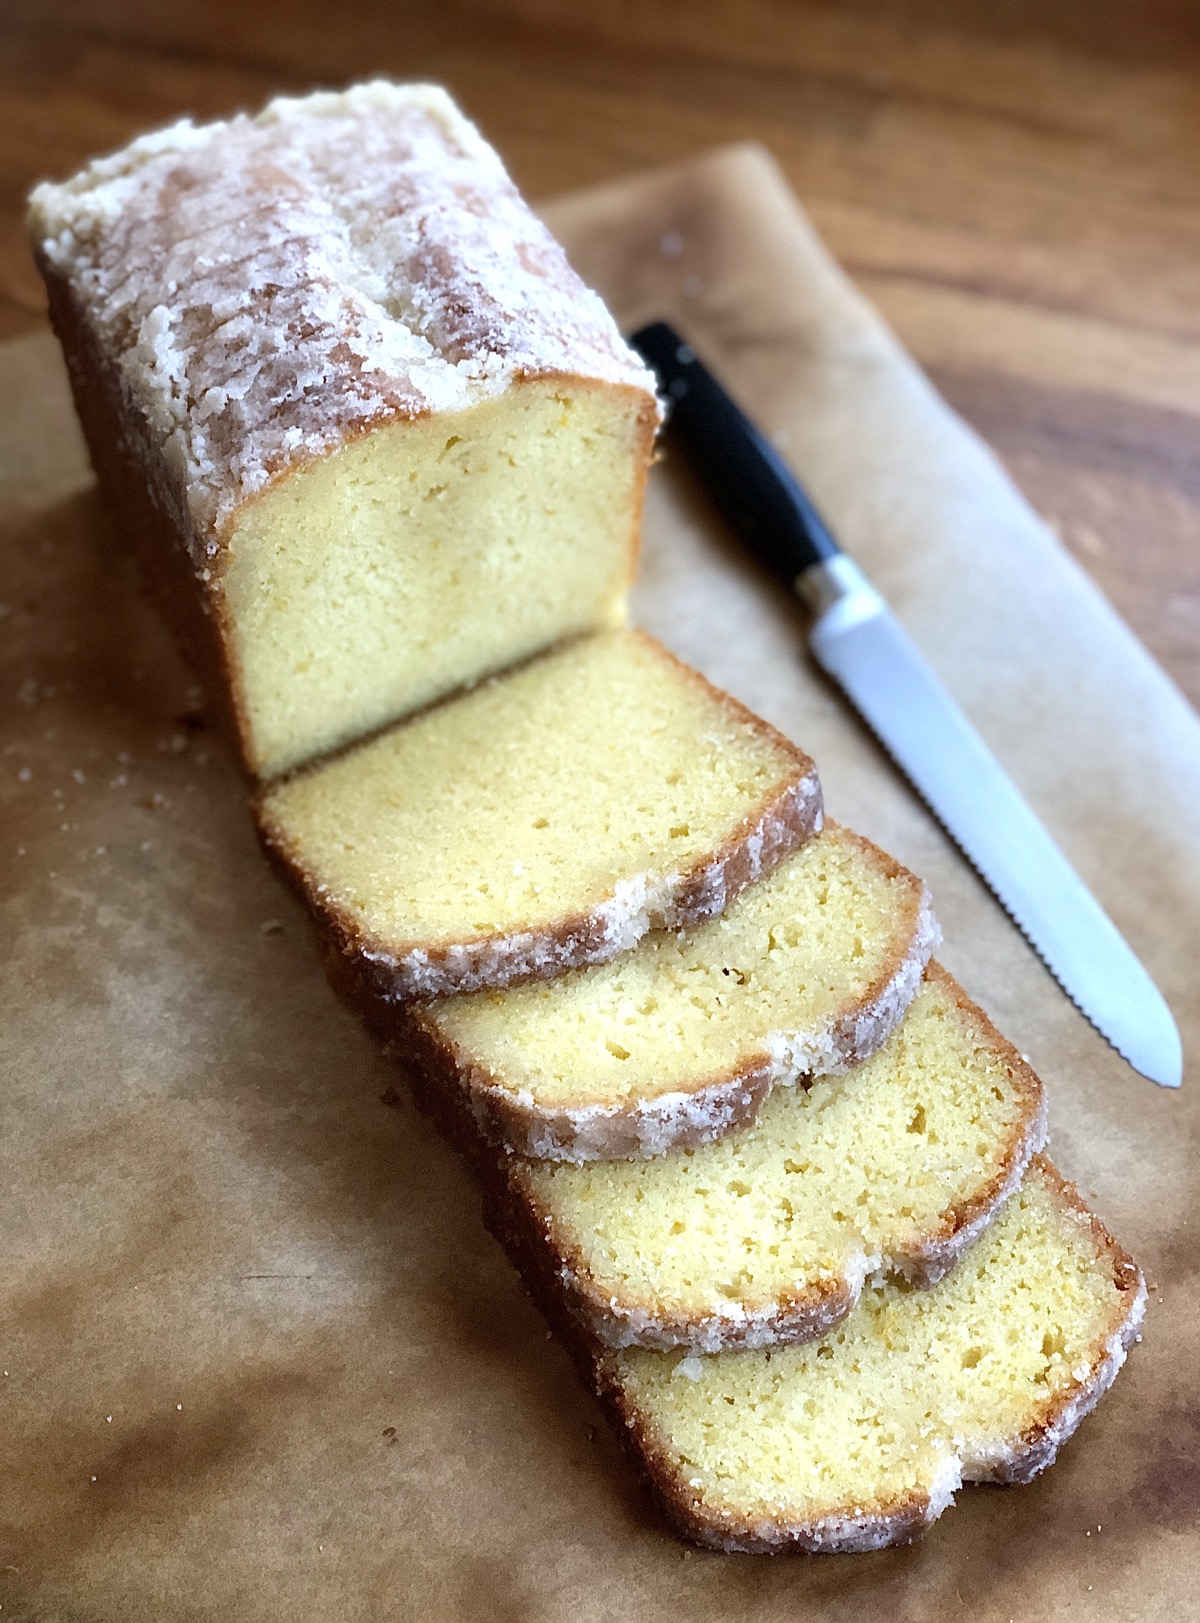 Orange pound cake, baked in a 9" x 4" pan then sliced on a cutting board